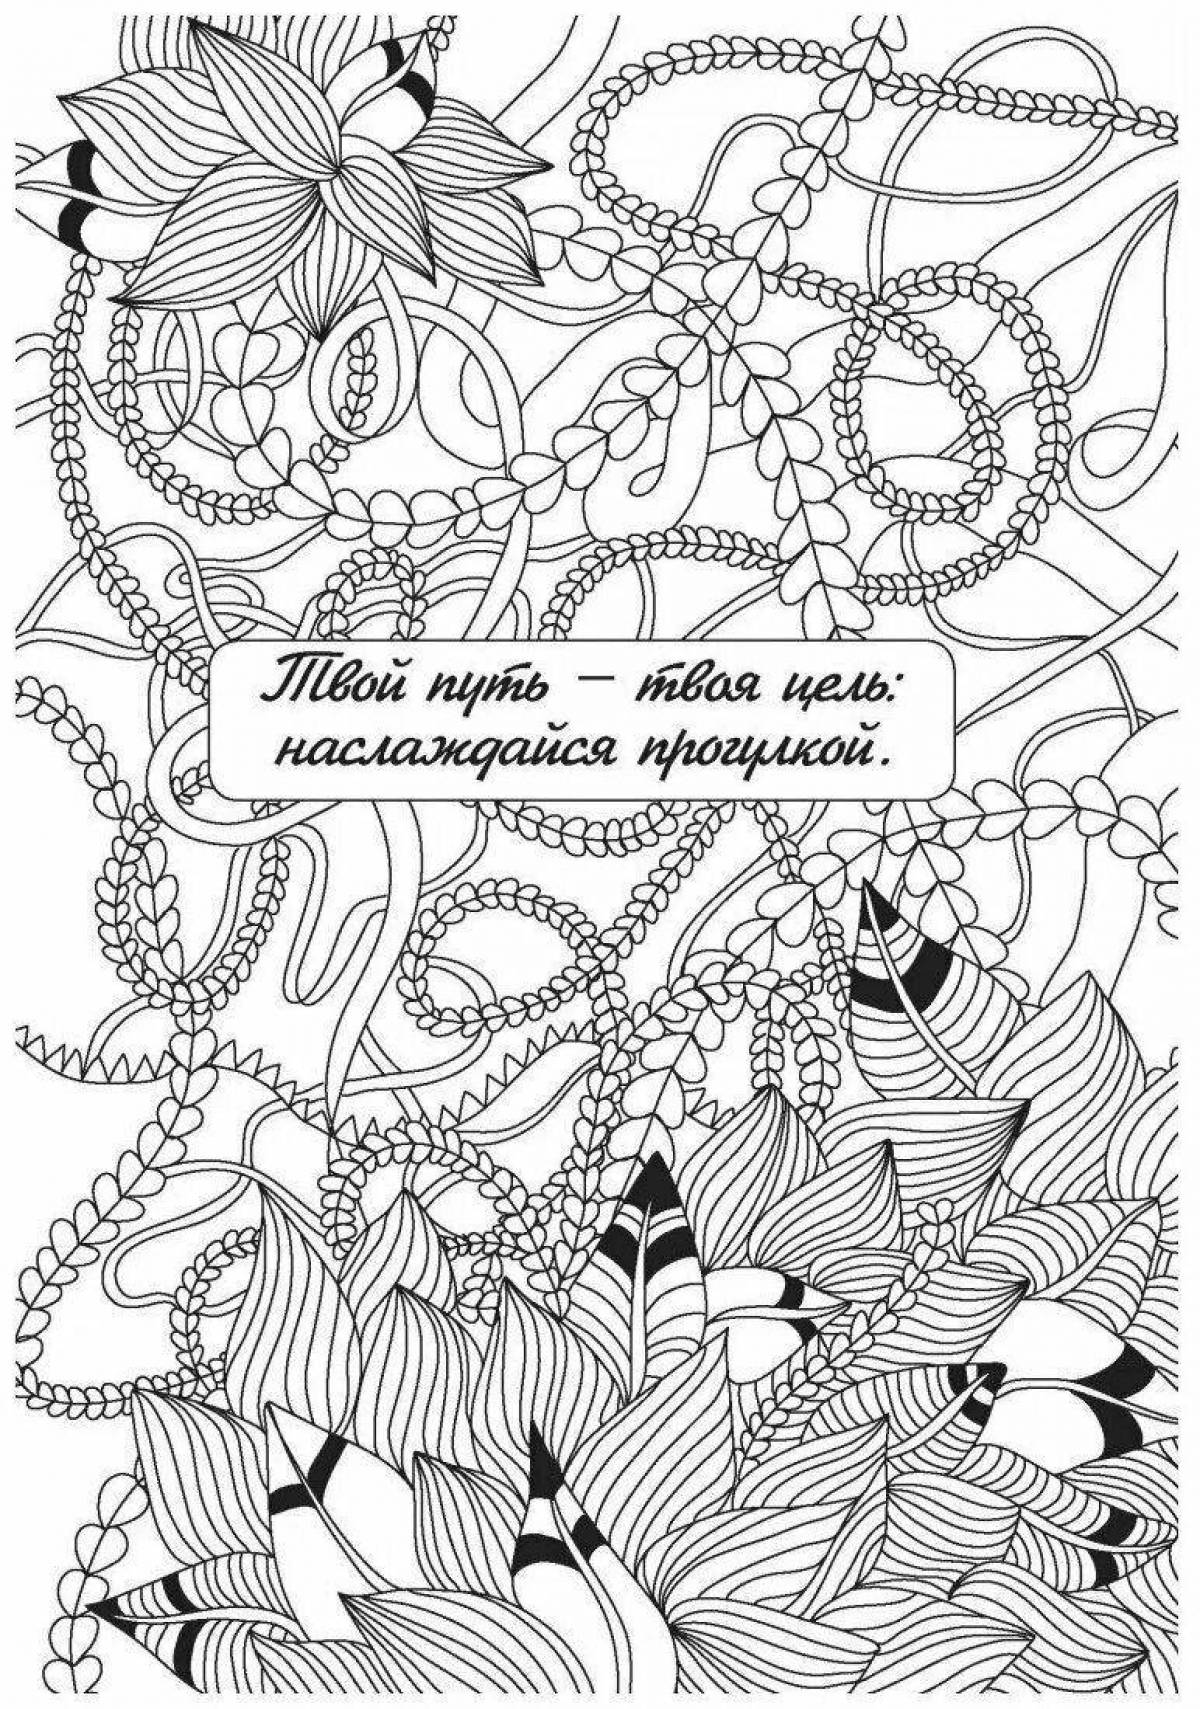 Exmo intriguing coloring book